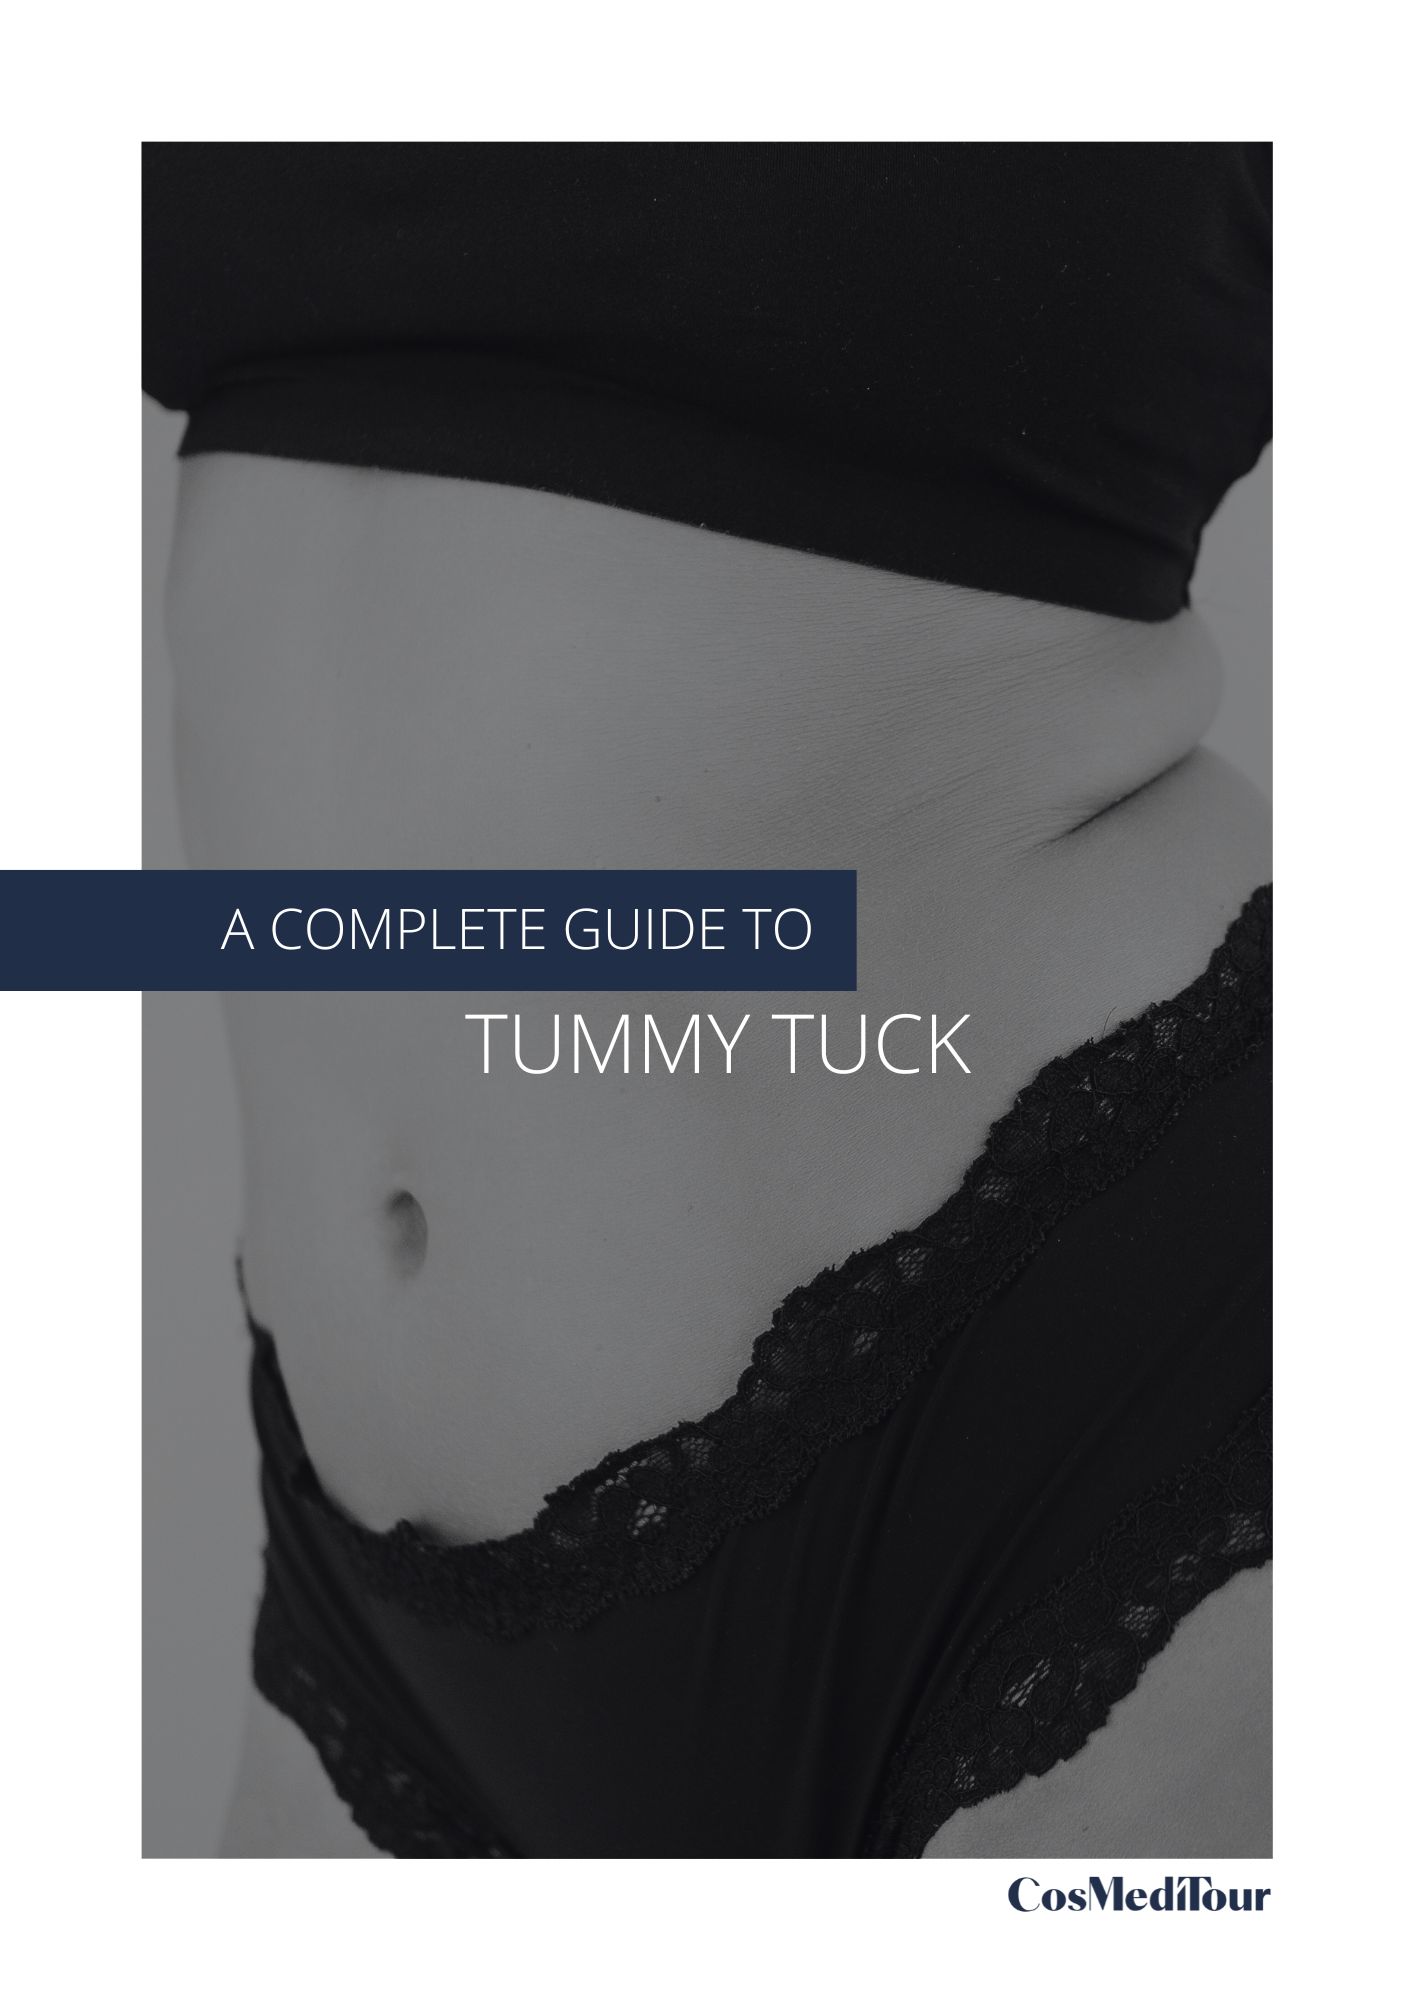 Your Guide to Tummy Tucks